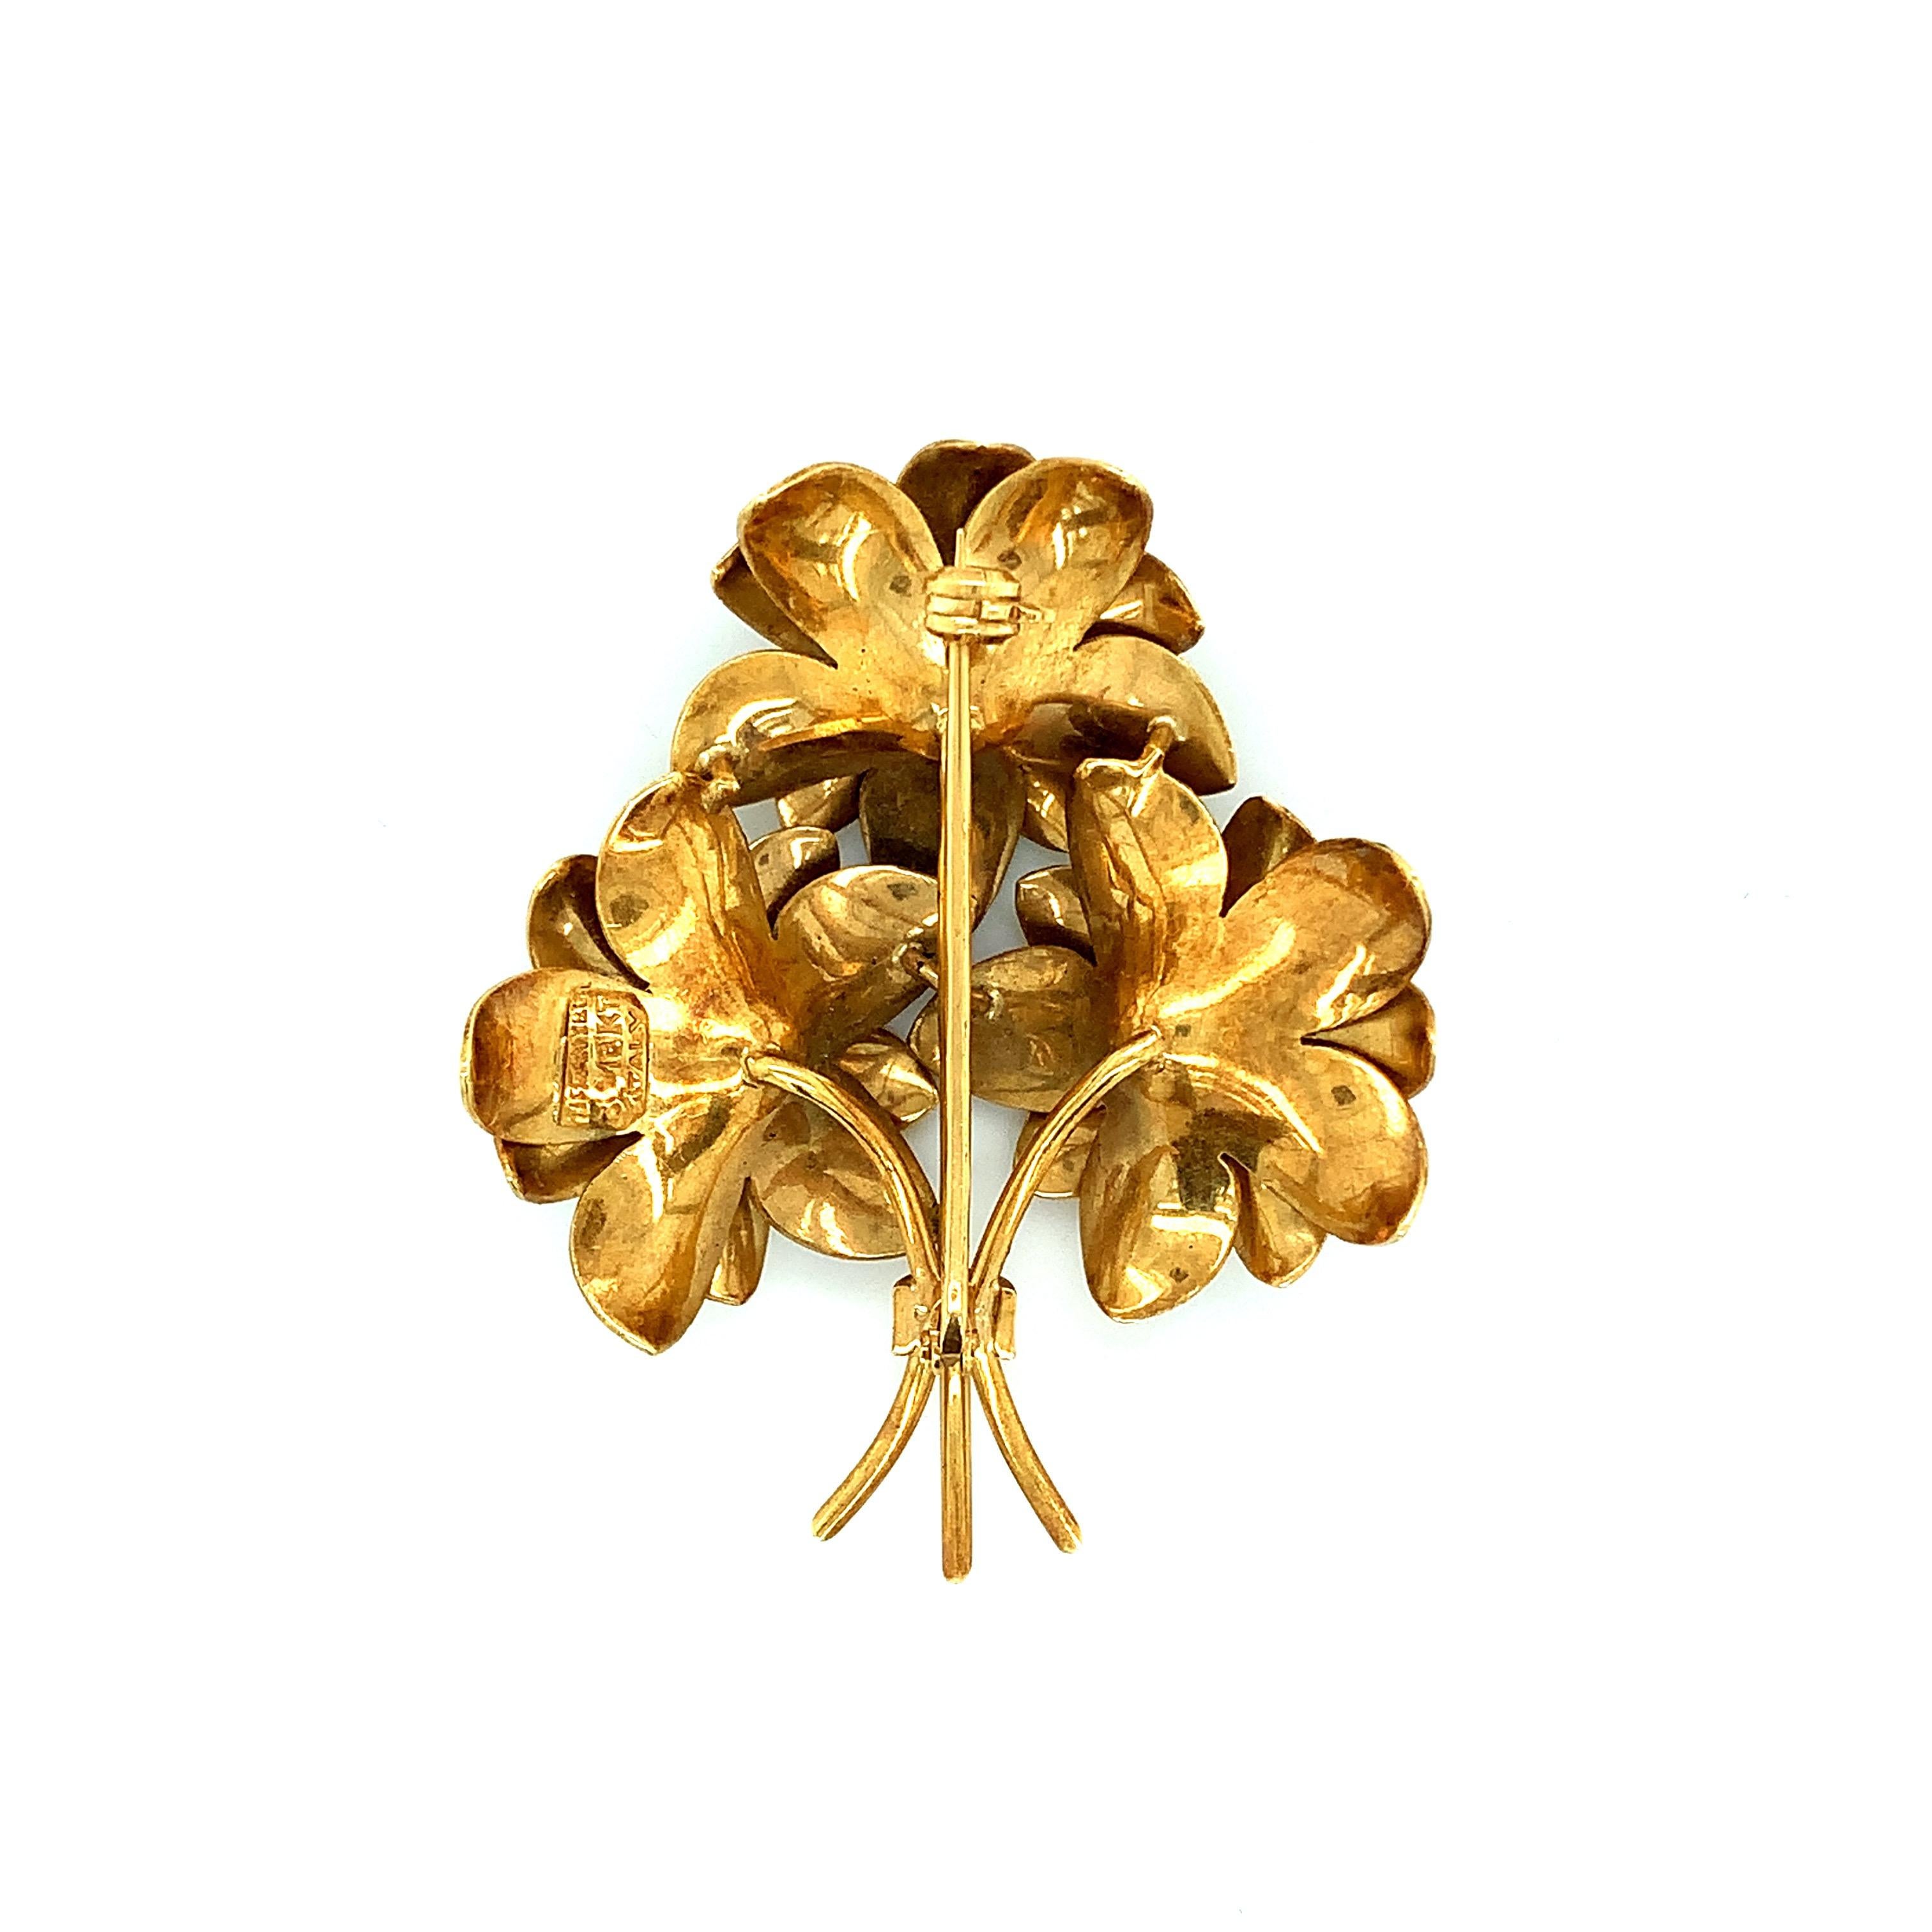 Tiffany & Co. 18 karat yellow gold brooch with a bouquet of flowers design. Made in Italy. Marked: Tiffany & Co. / 18K / Italy. Total weight: 16.9 grams. Width: 1.5 inch. Length: 1.88 inch. 